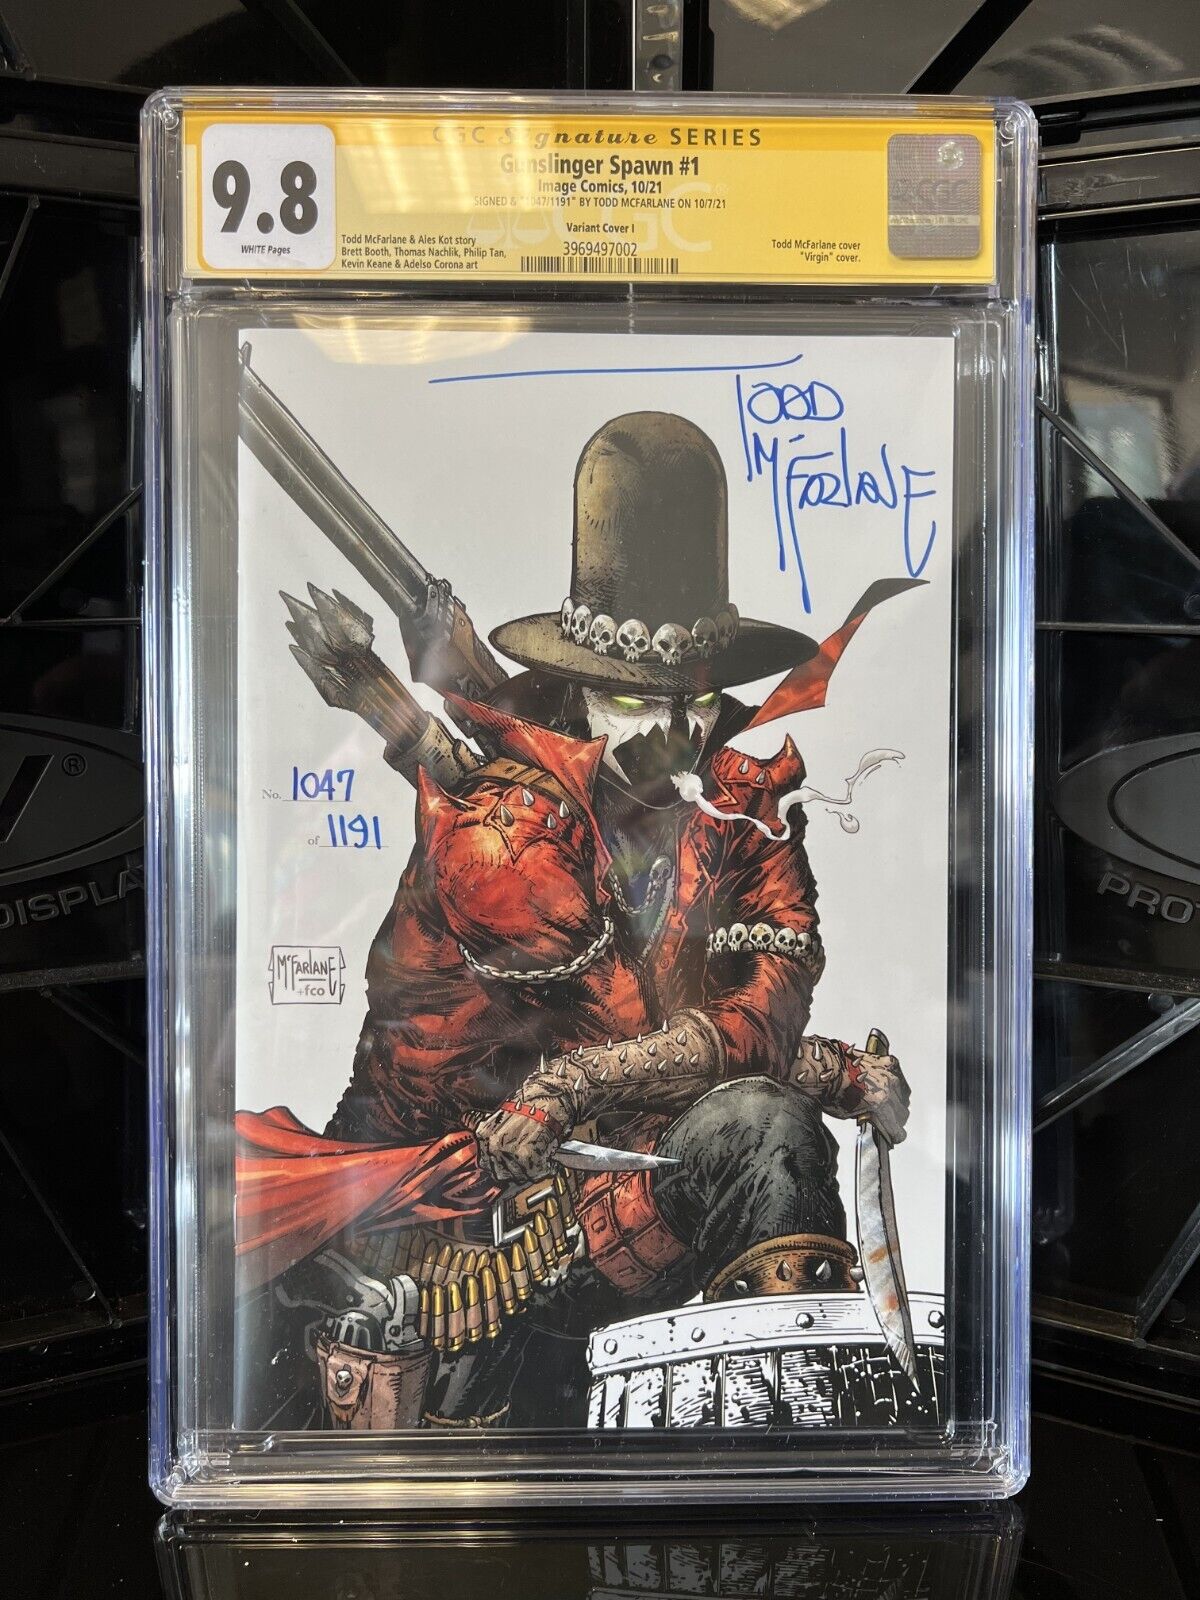 Gunslinger Spawn #1 CGC SS 9.8 - Signed McFarlane 1047/1191 in BLUE only 5 exist